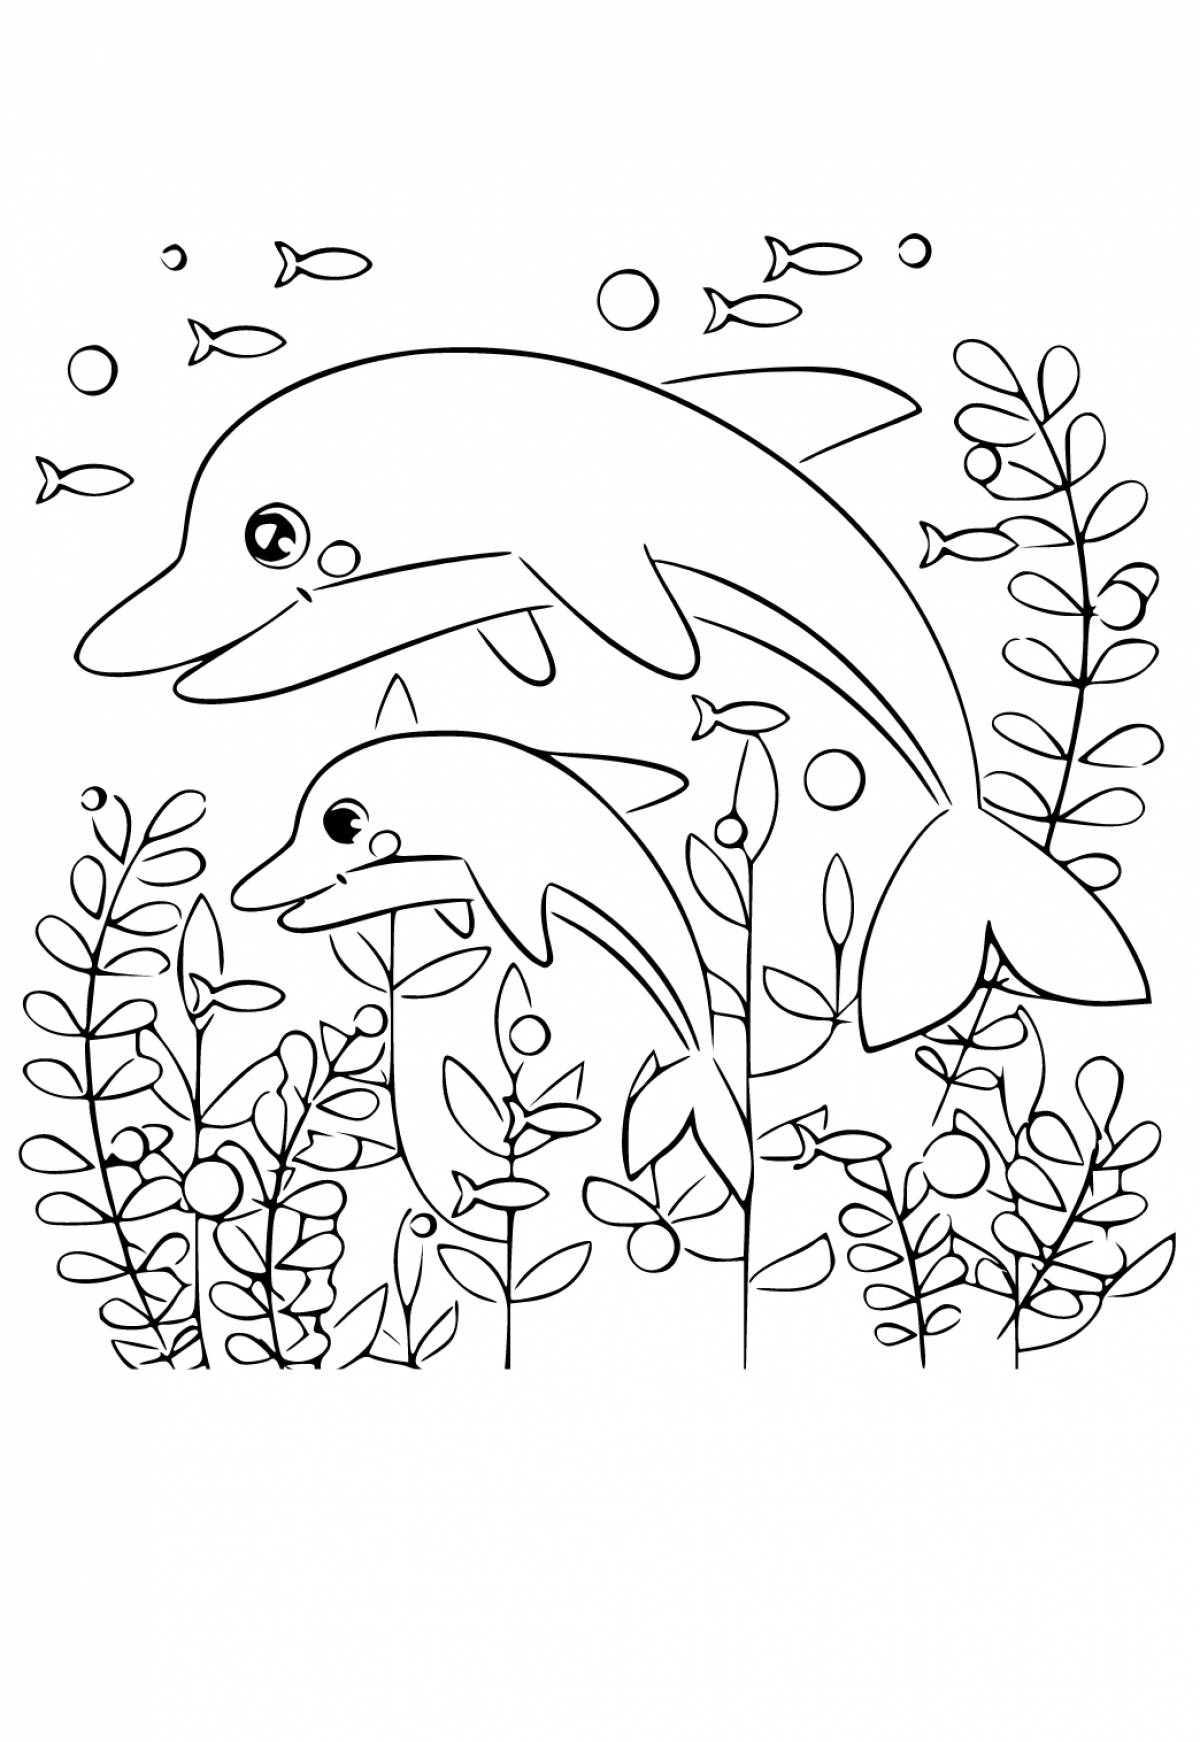 Unforgettable dolphin coloring book